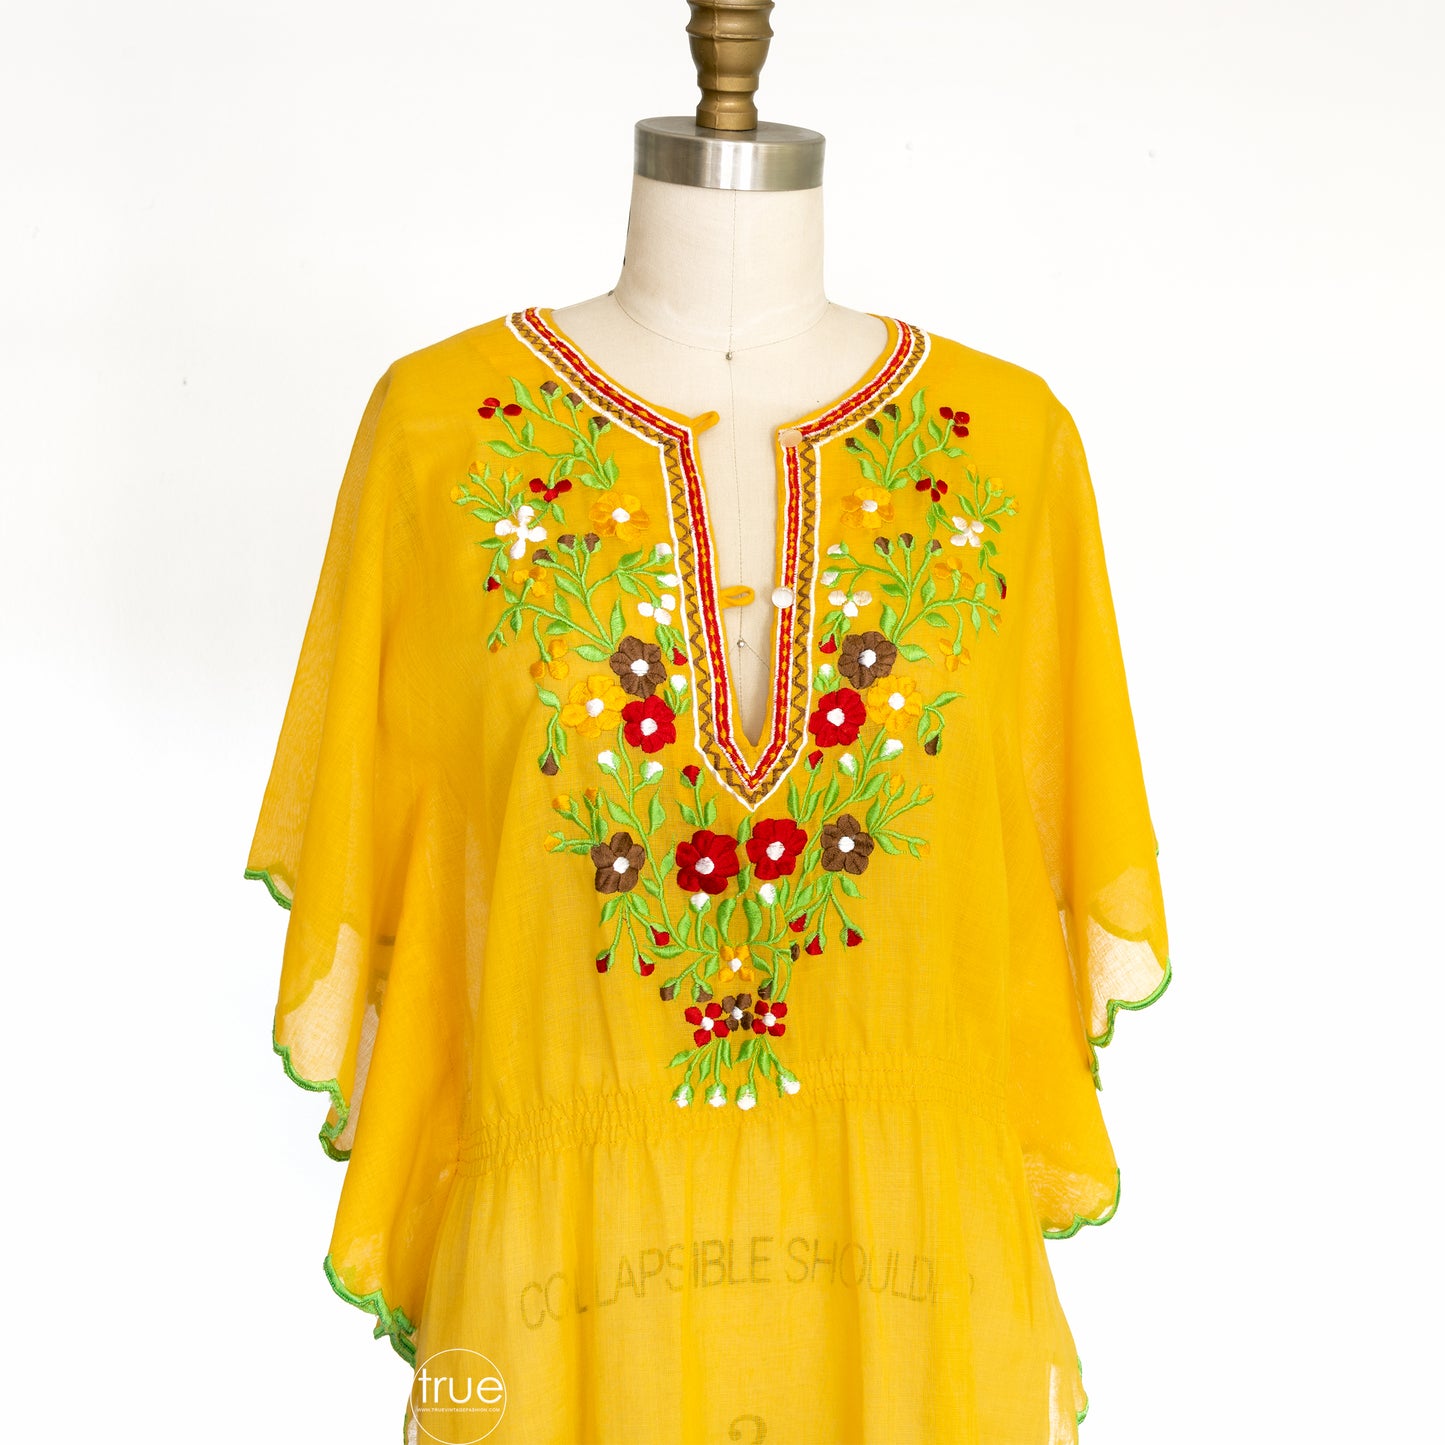 vintage 1970's top ...gorgeous golden yellow embroidered gauzy poncho top